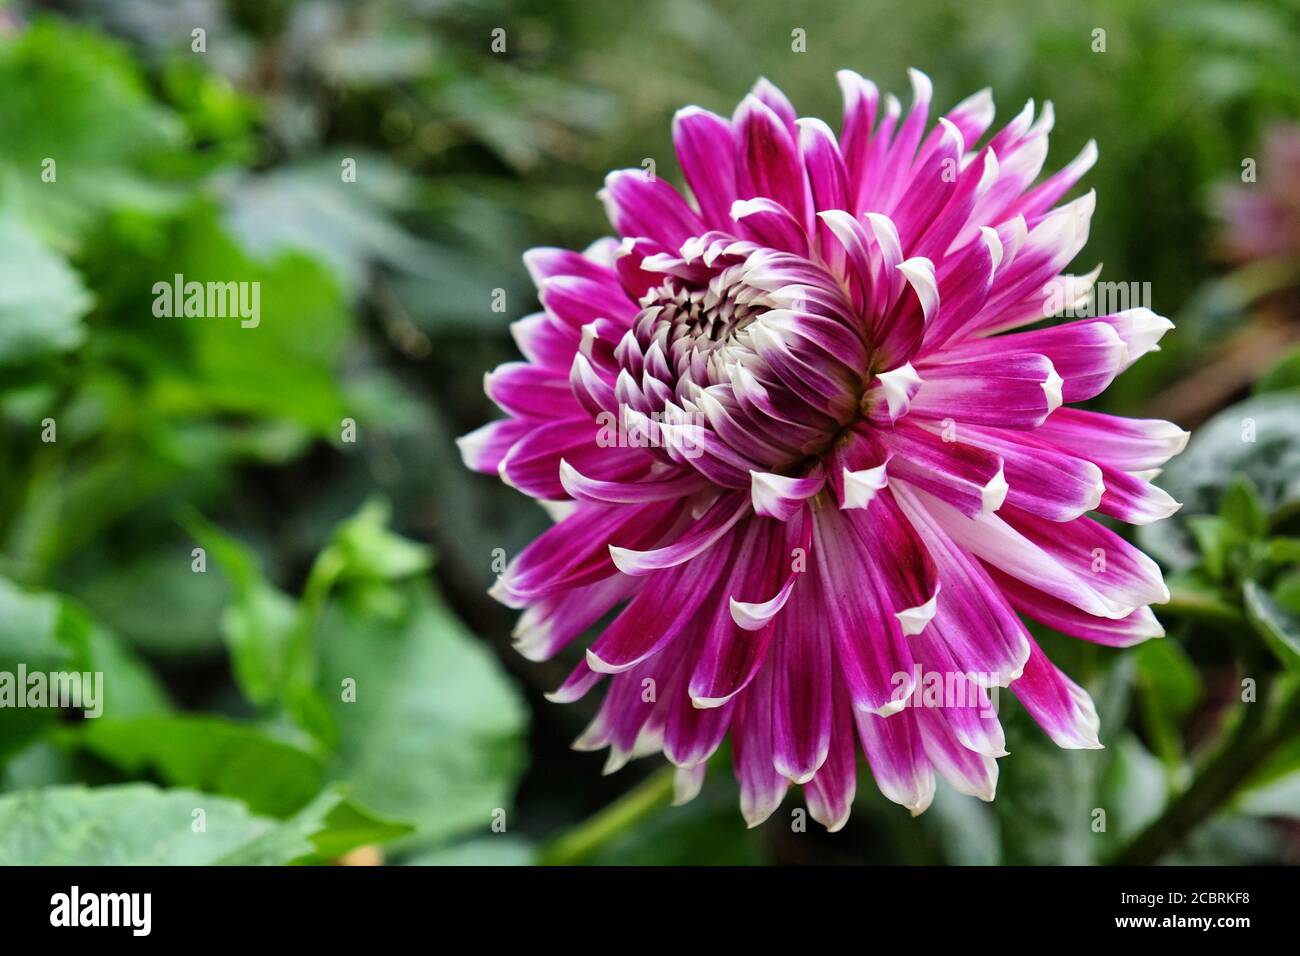 Pink and purple decorative dahlia flowers in bloom during late summer Stock Photo